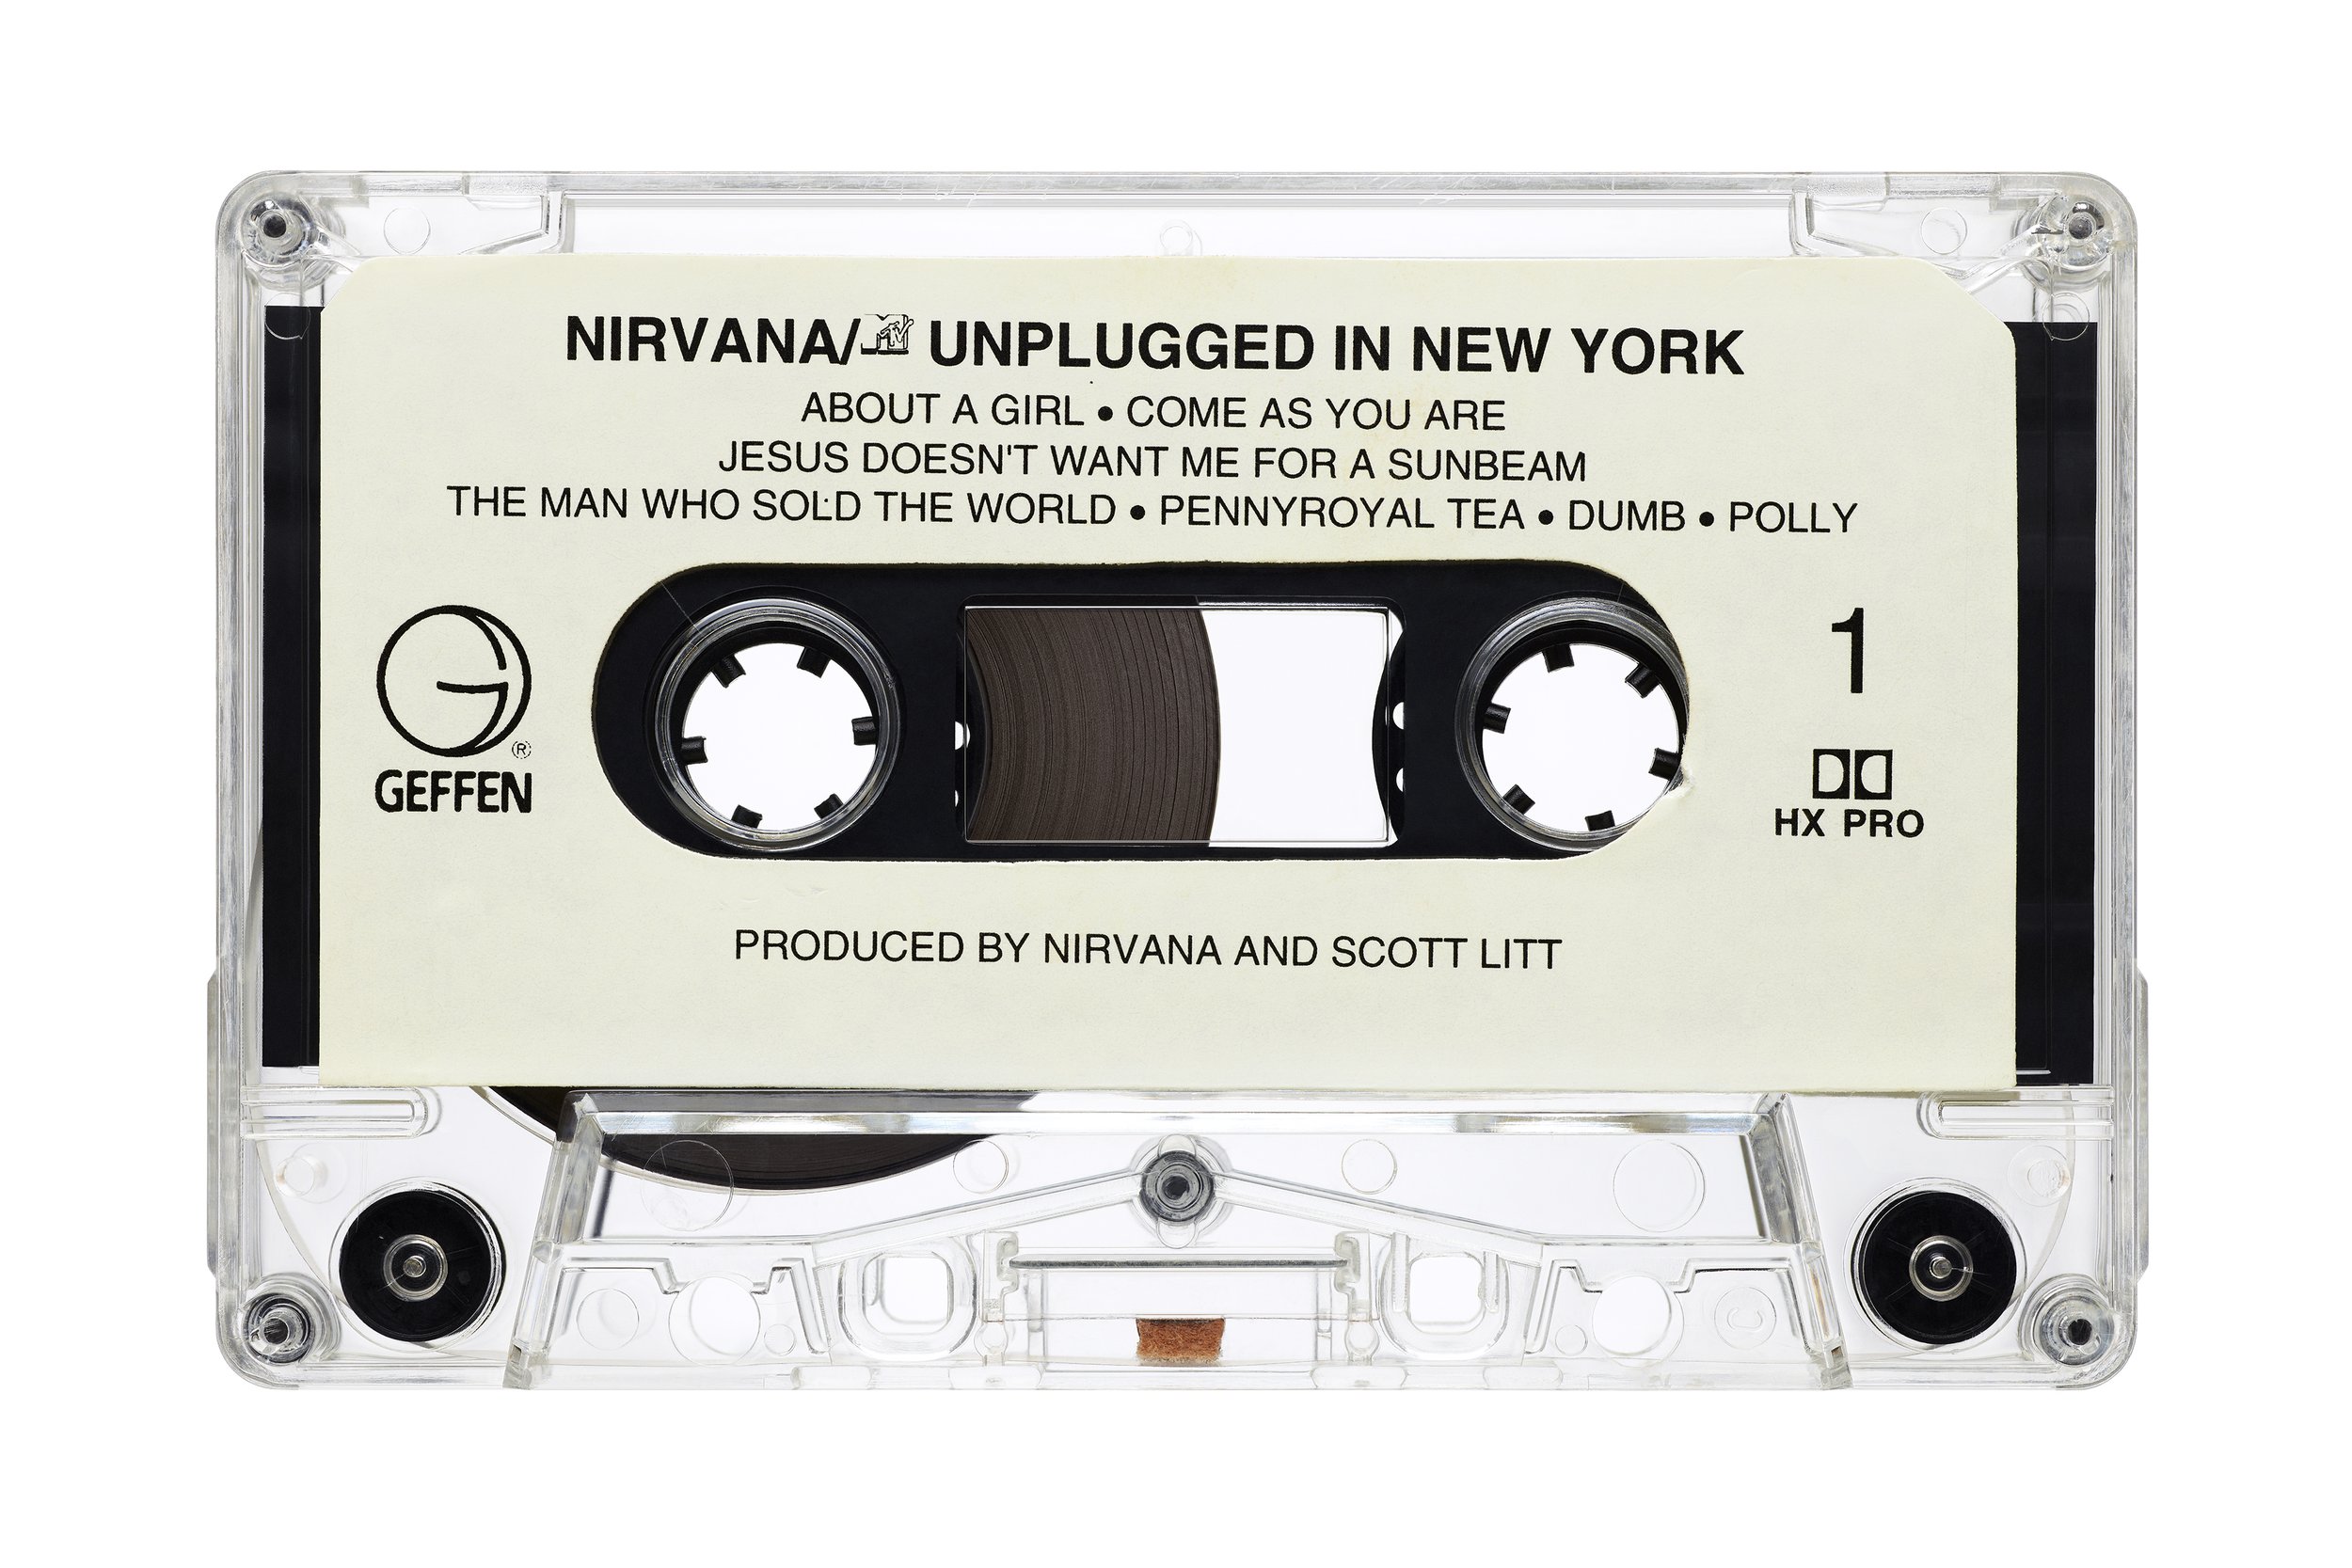  Nirvana - Unplugged in New York  Available through   Clic Gallery   in New York.    Contact   